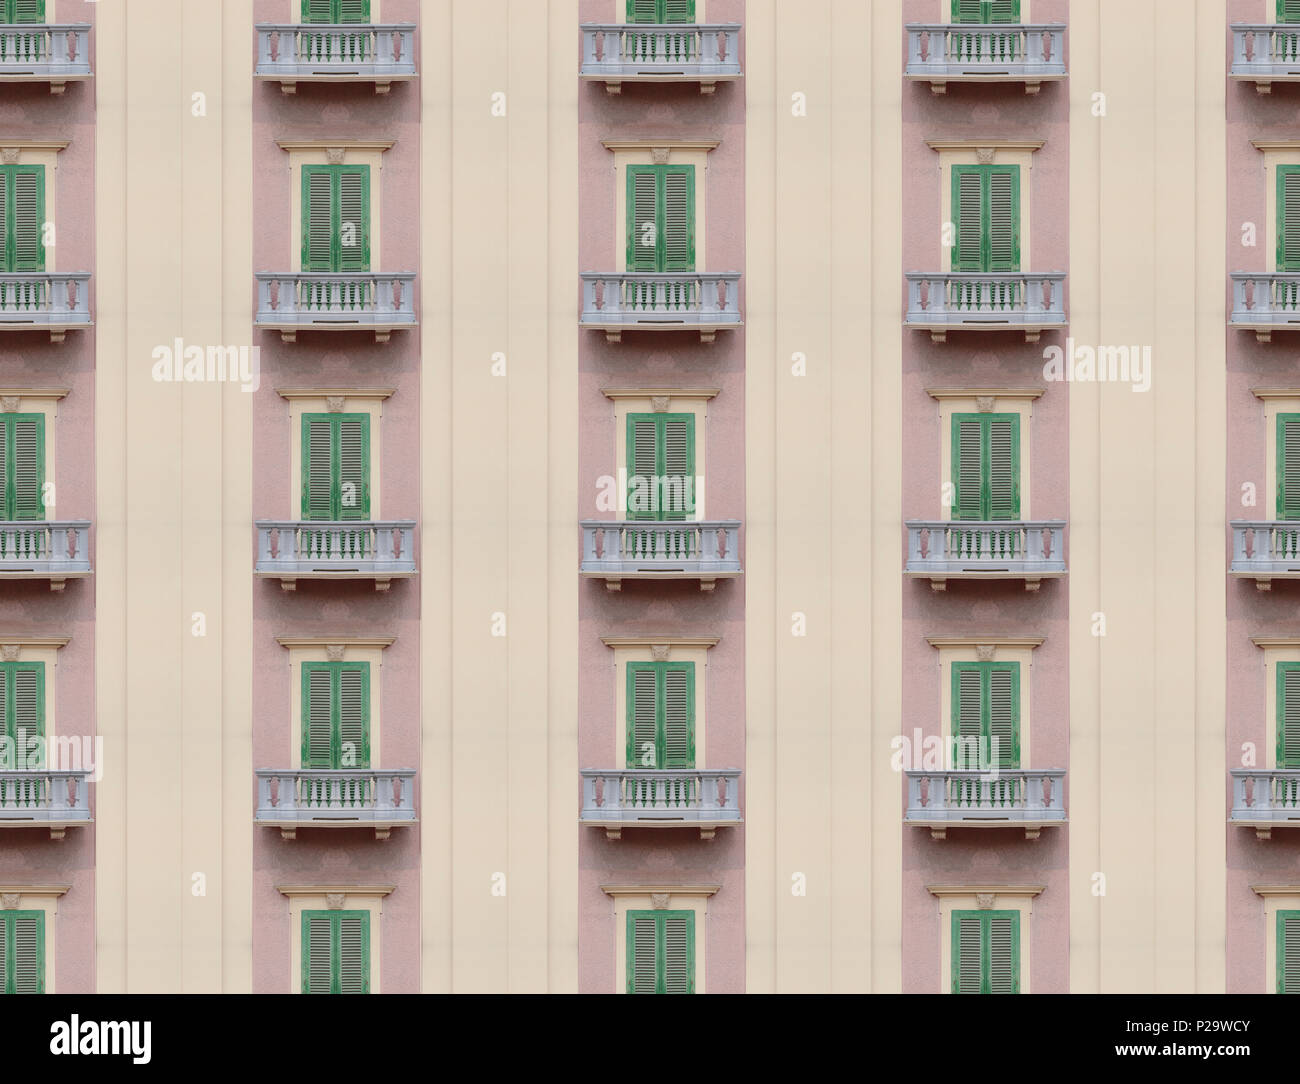 An endless facade (a wall full of identical windows). Easy photoshop trick. Stock Photo